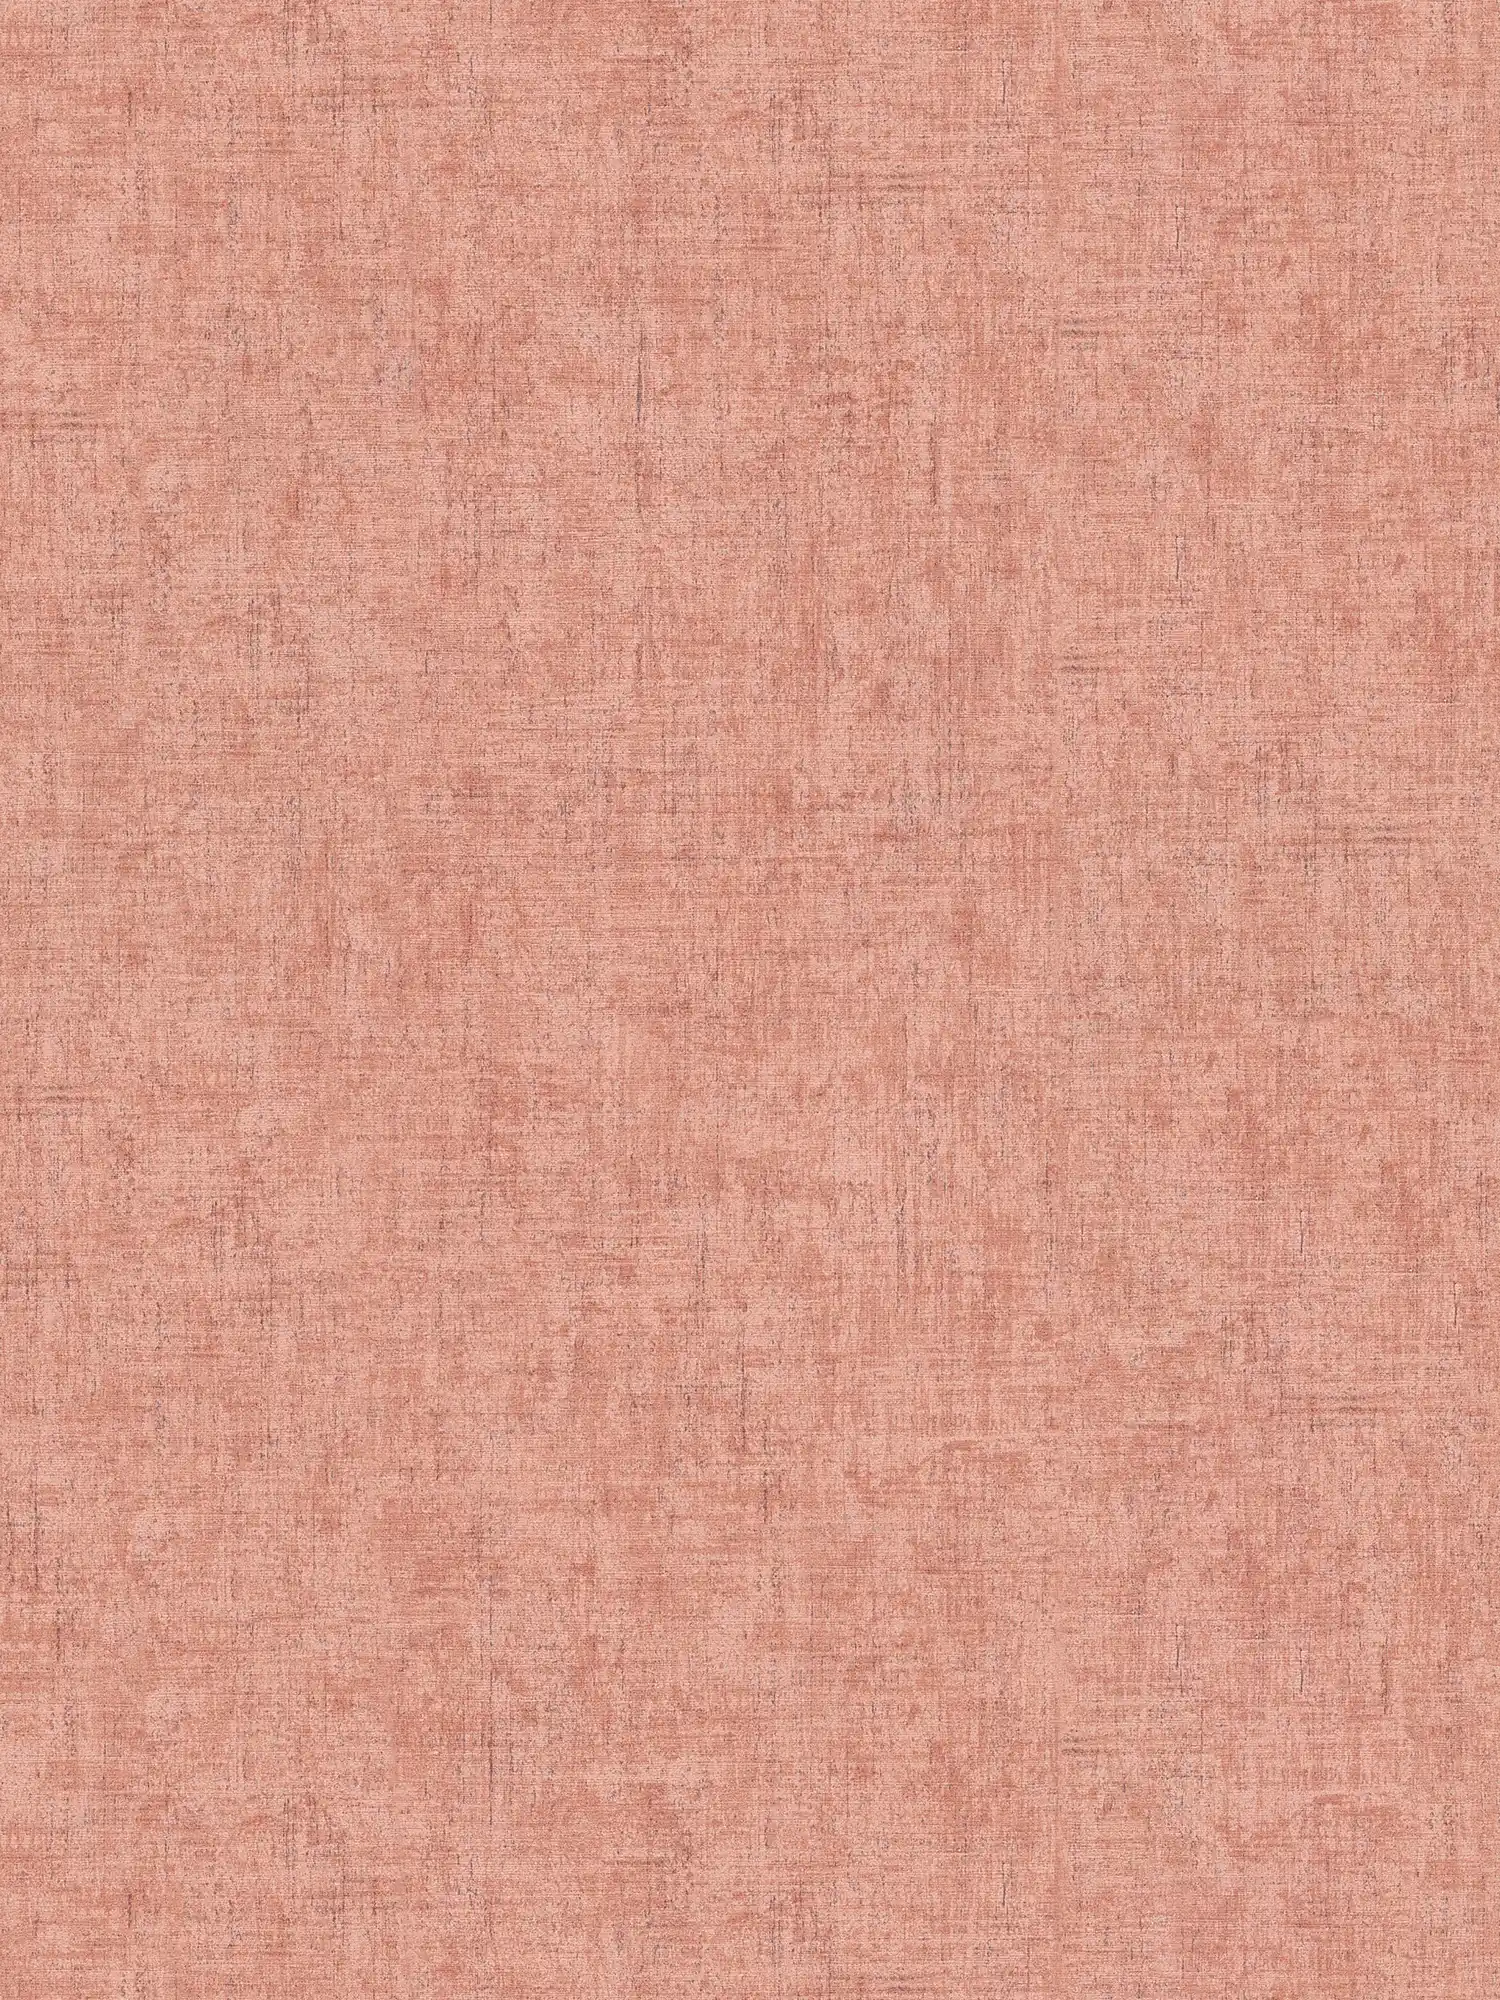 Non-woven wallpaper pink grey mottled with colour hatching & embossed texture
